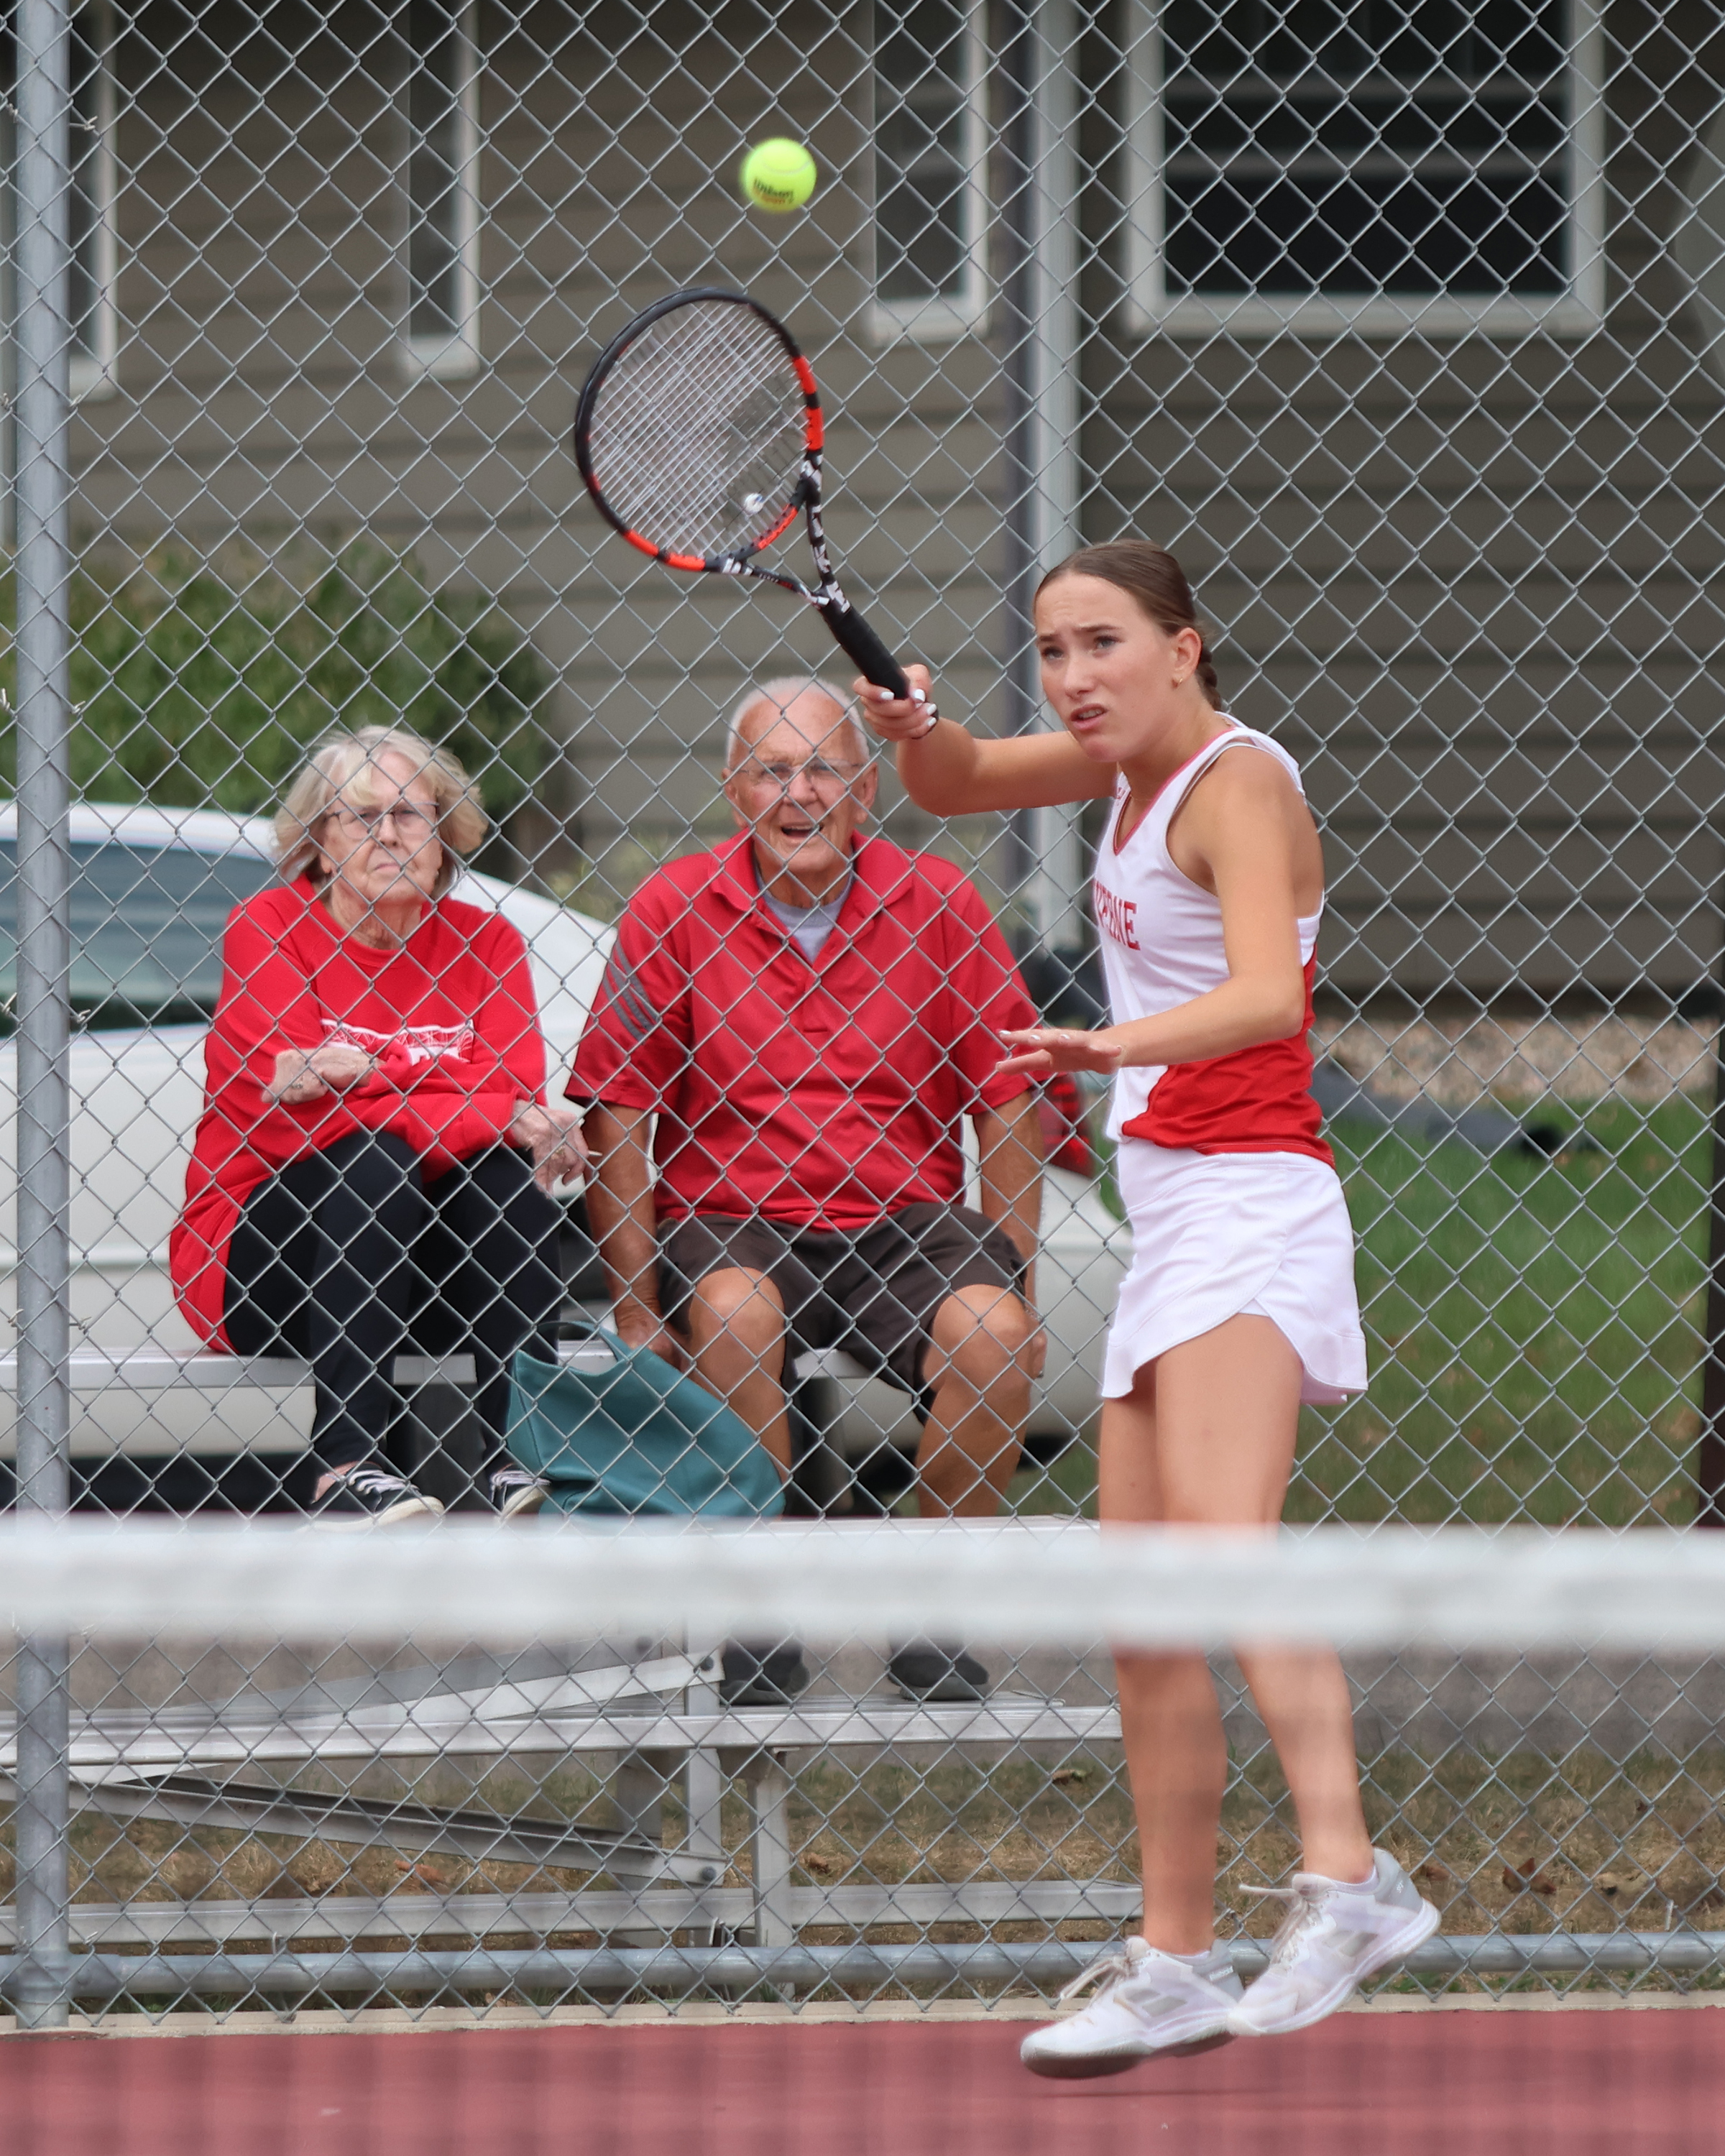 Senior Morgan Hadler returns a volley against her Marshall opponents Thursday, Sept. 7, at the Luverne tennis courts. Her grandparents, Ray and Joann Hoogeveen, sit in the stands behind her watching intently.